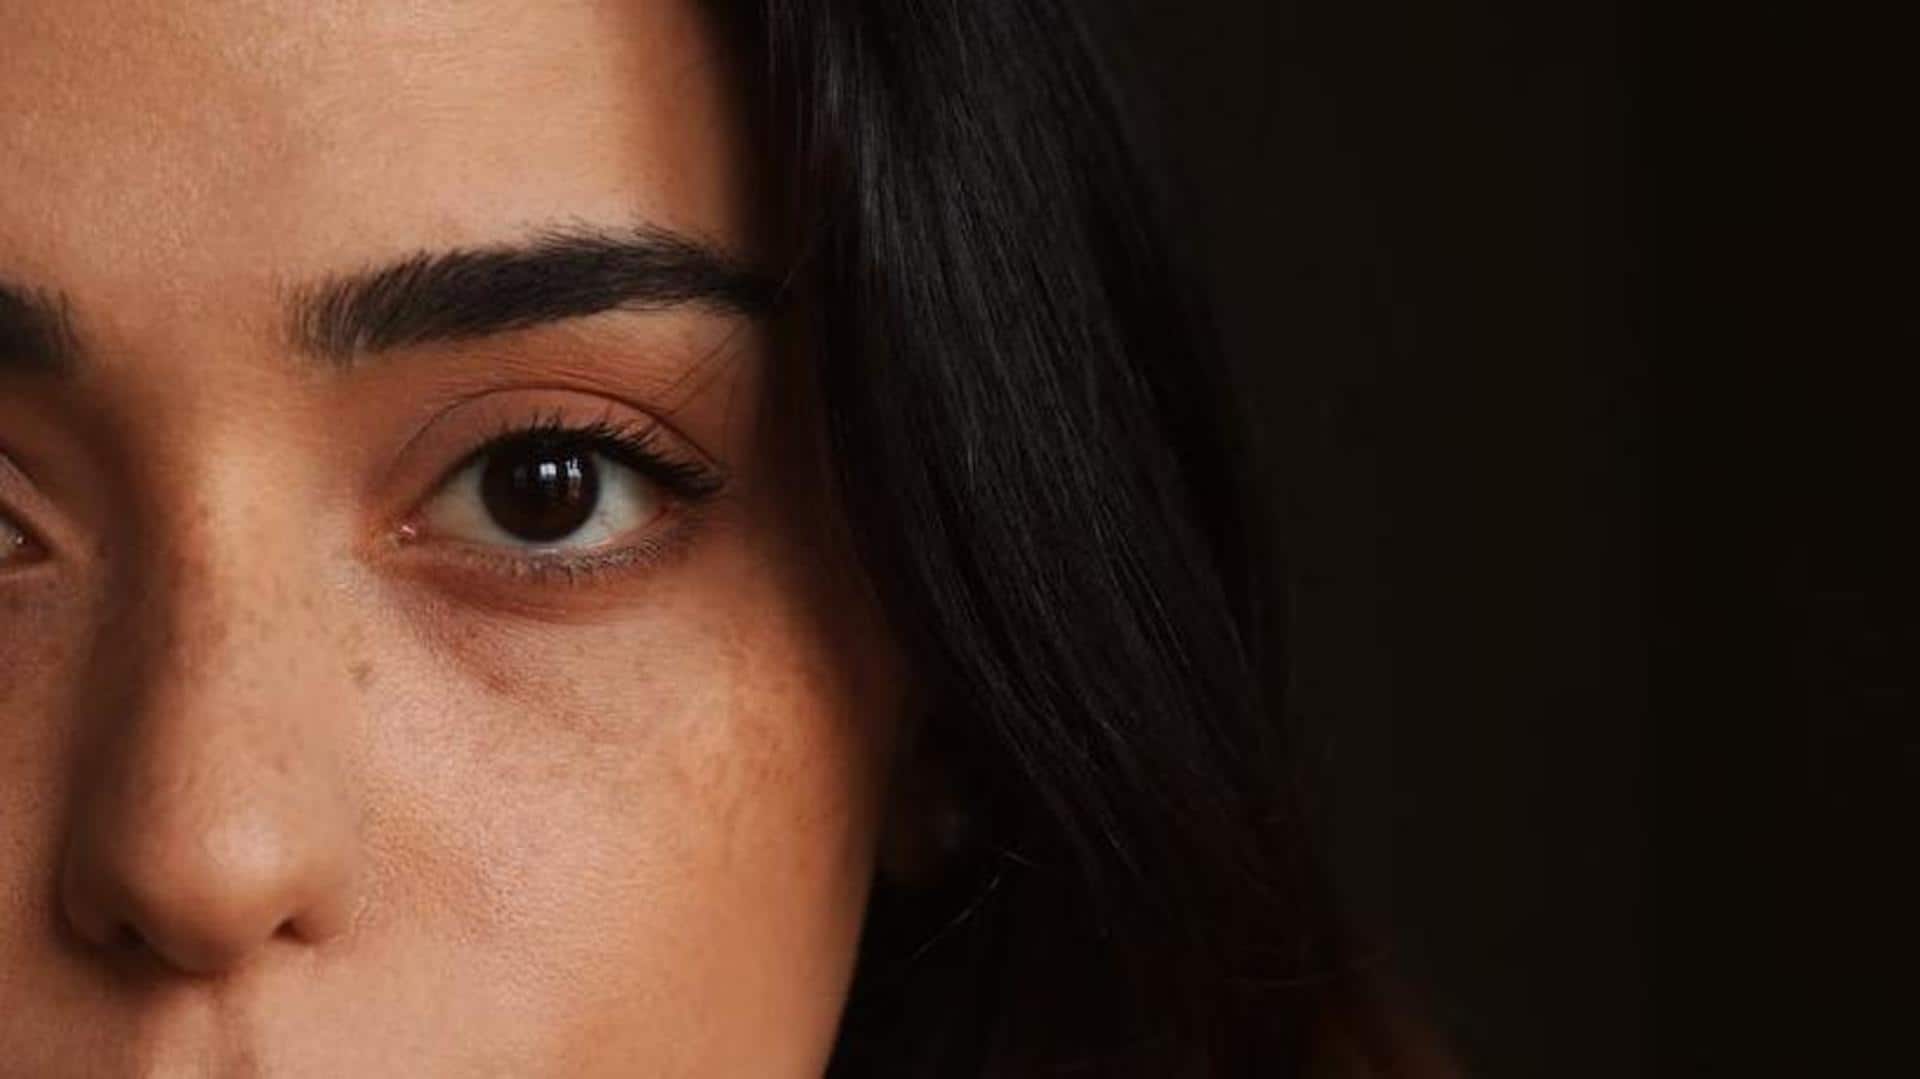 Fake freckles: Here's about the latest trend